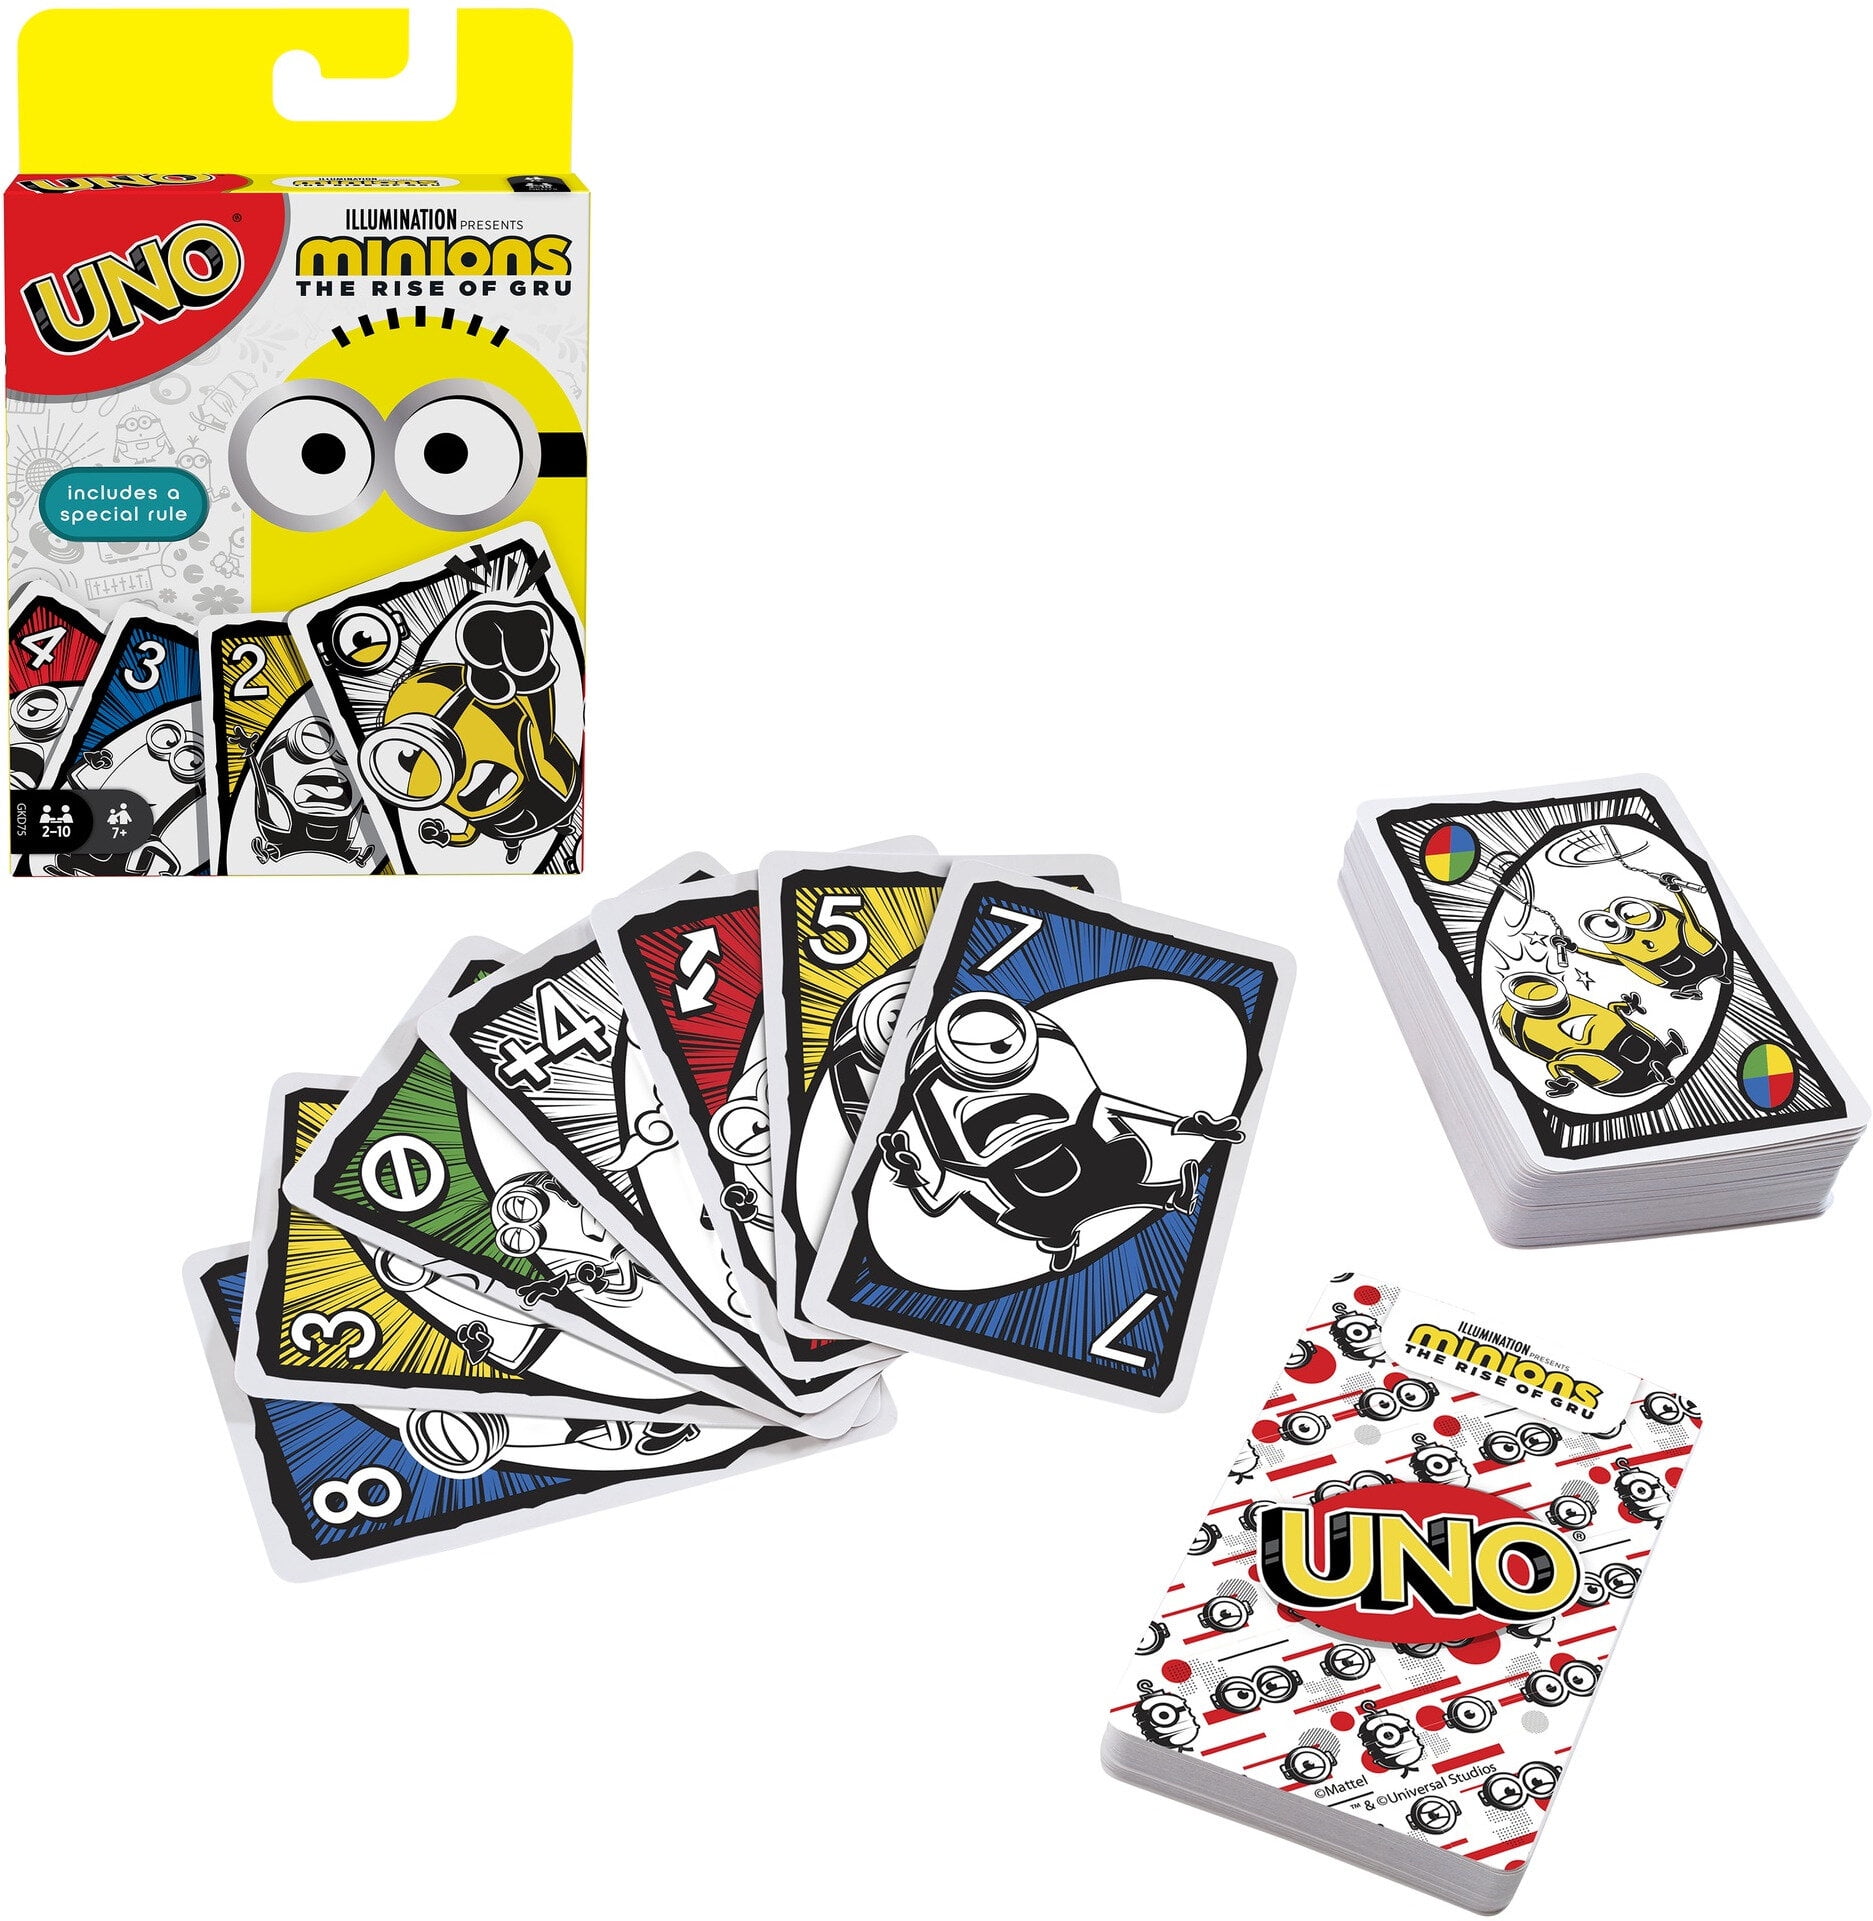 Order today for fast shipping!! Brand New! UNO Card Game The Office Theme! 